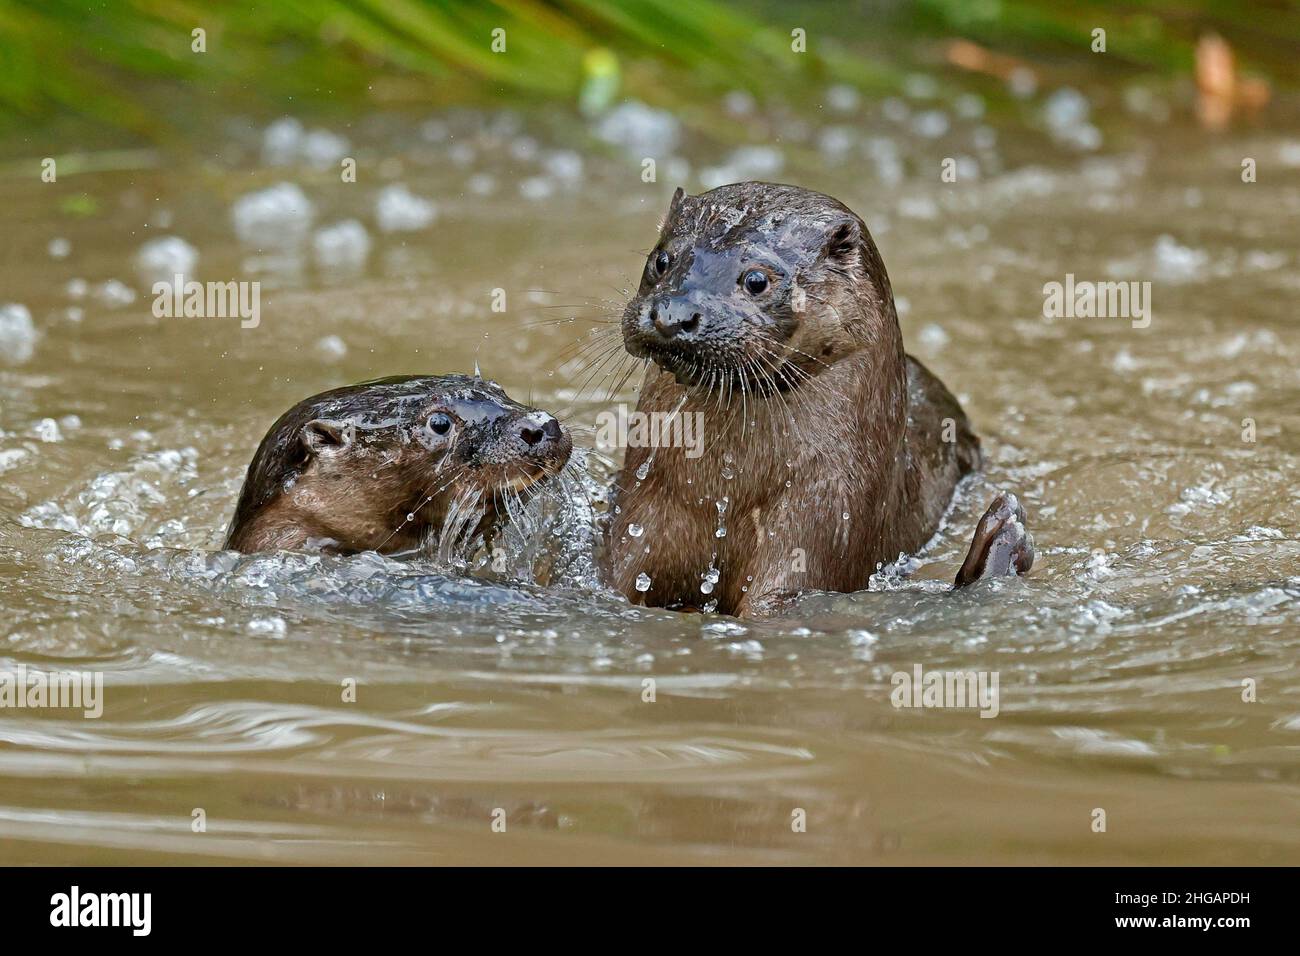 Two young european otter (Lutra lutra), playing in a pond, captive Stock Photo